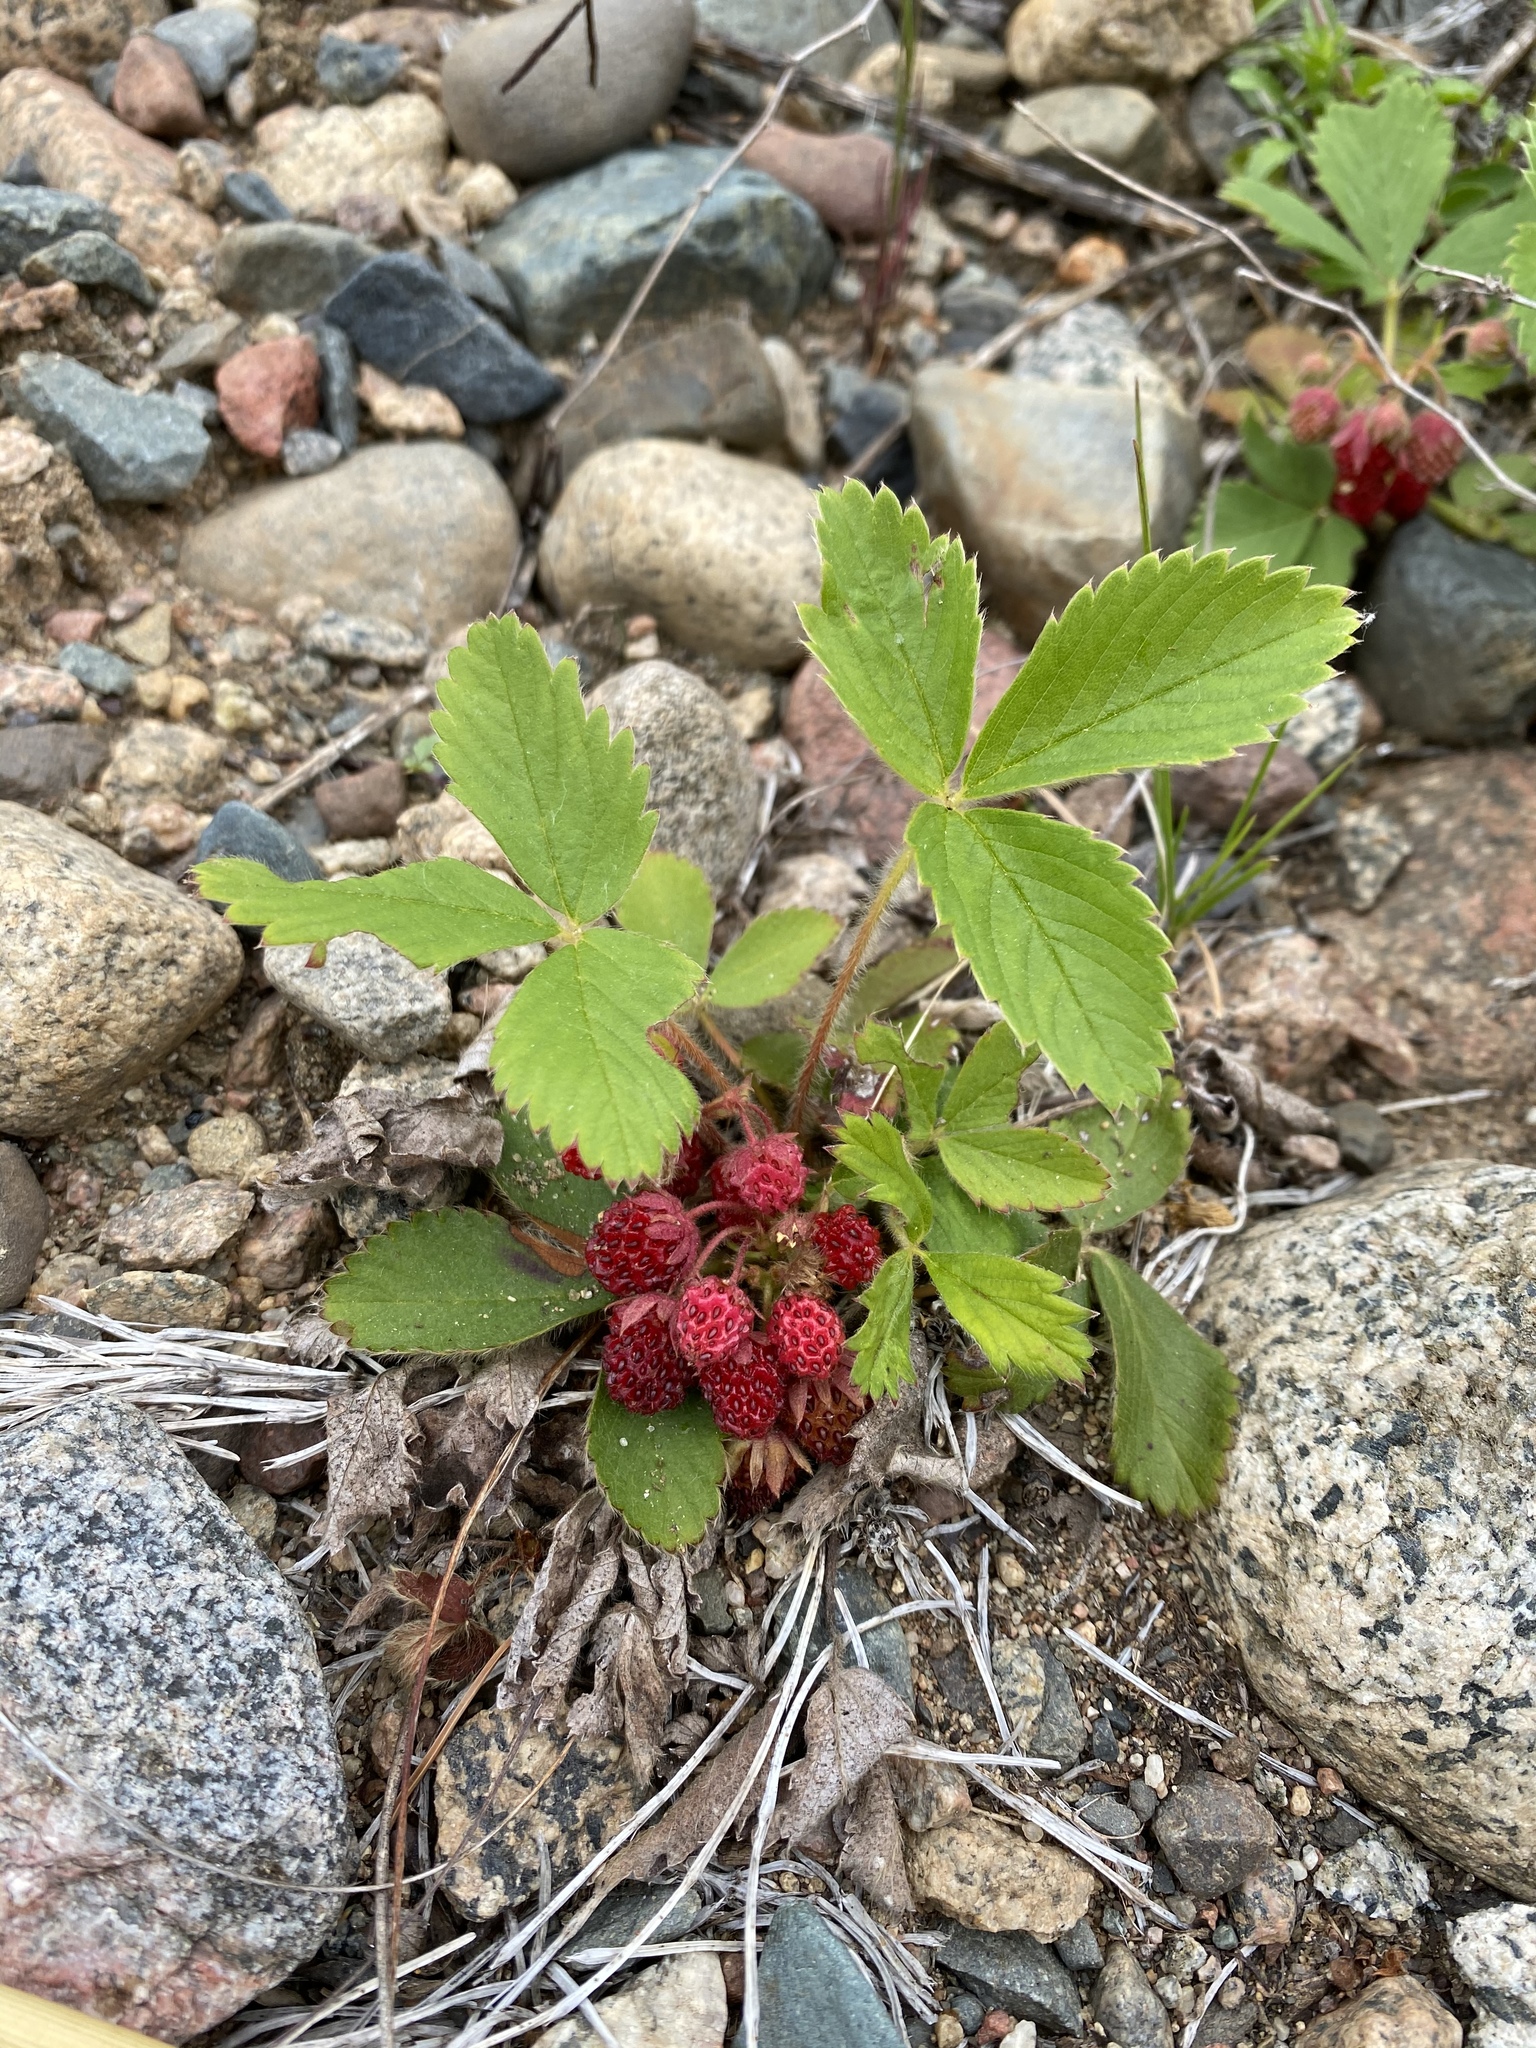 This strawberry plant grows on rocky soil and has a cluster of about nine ripe, red strawberries.